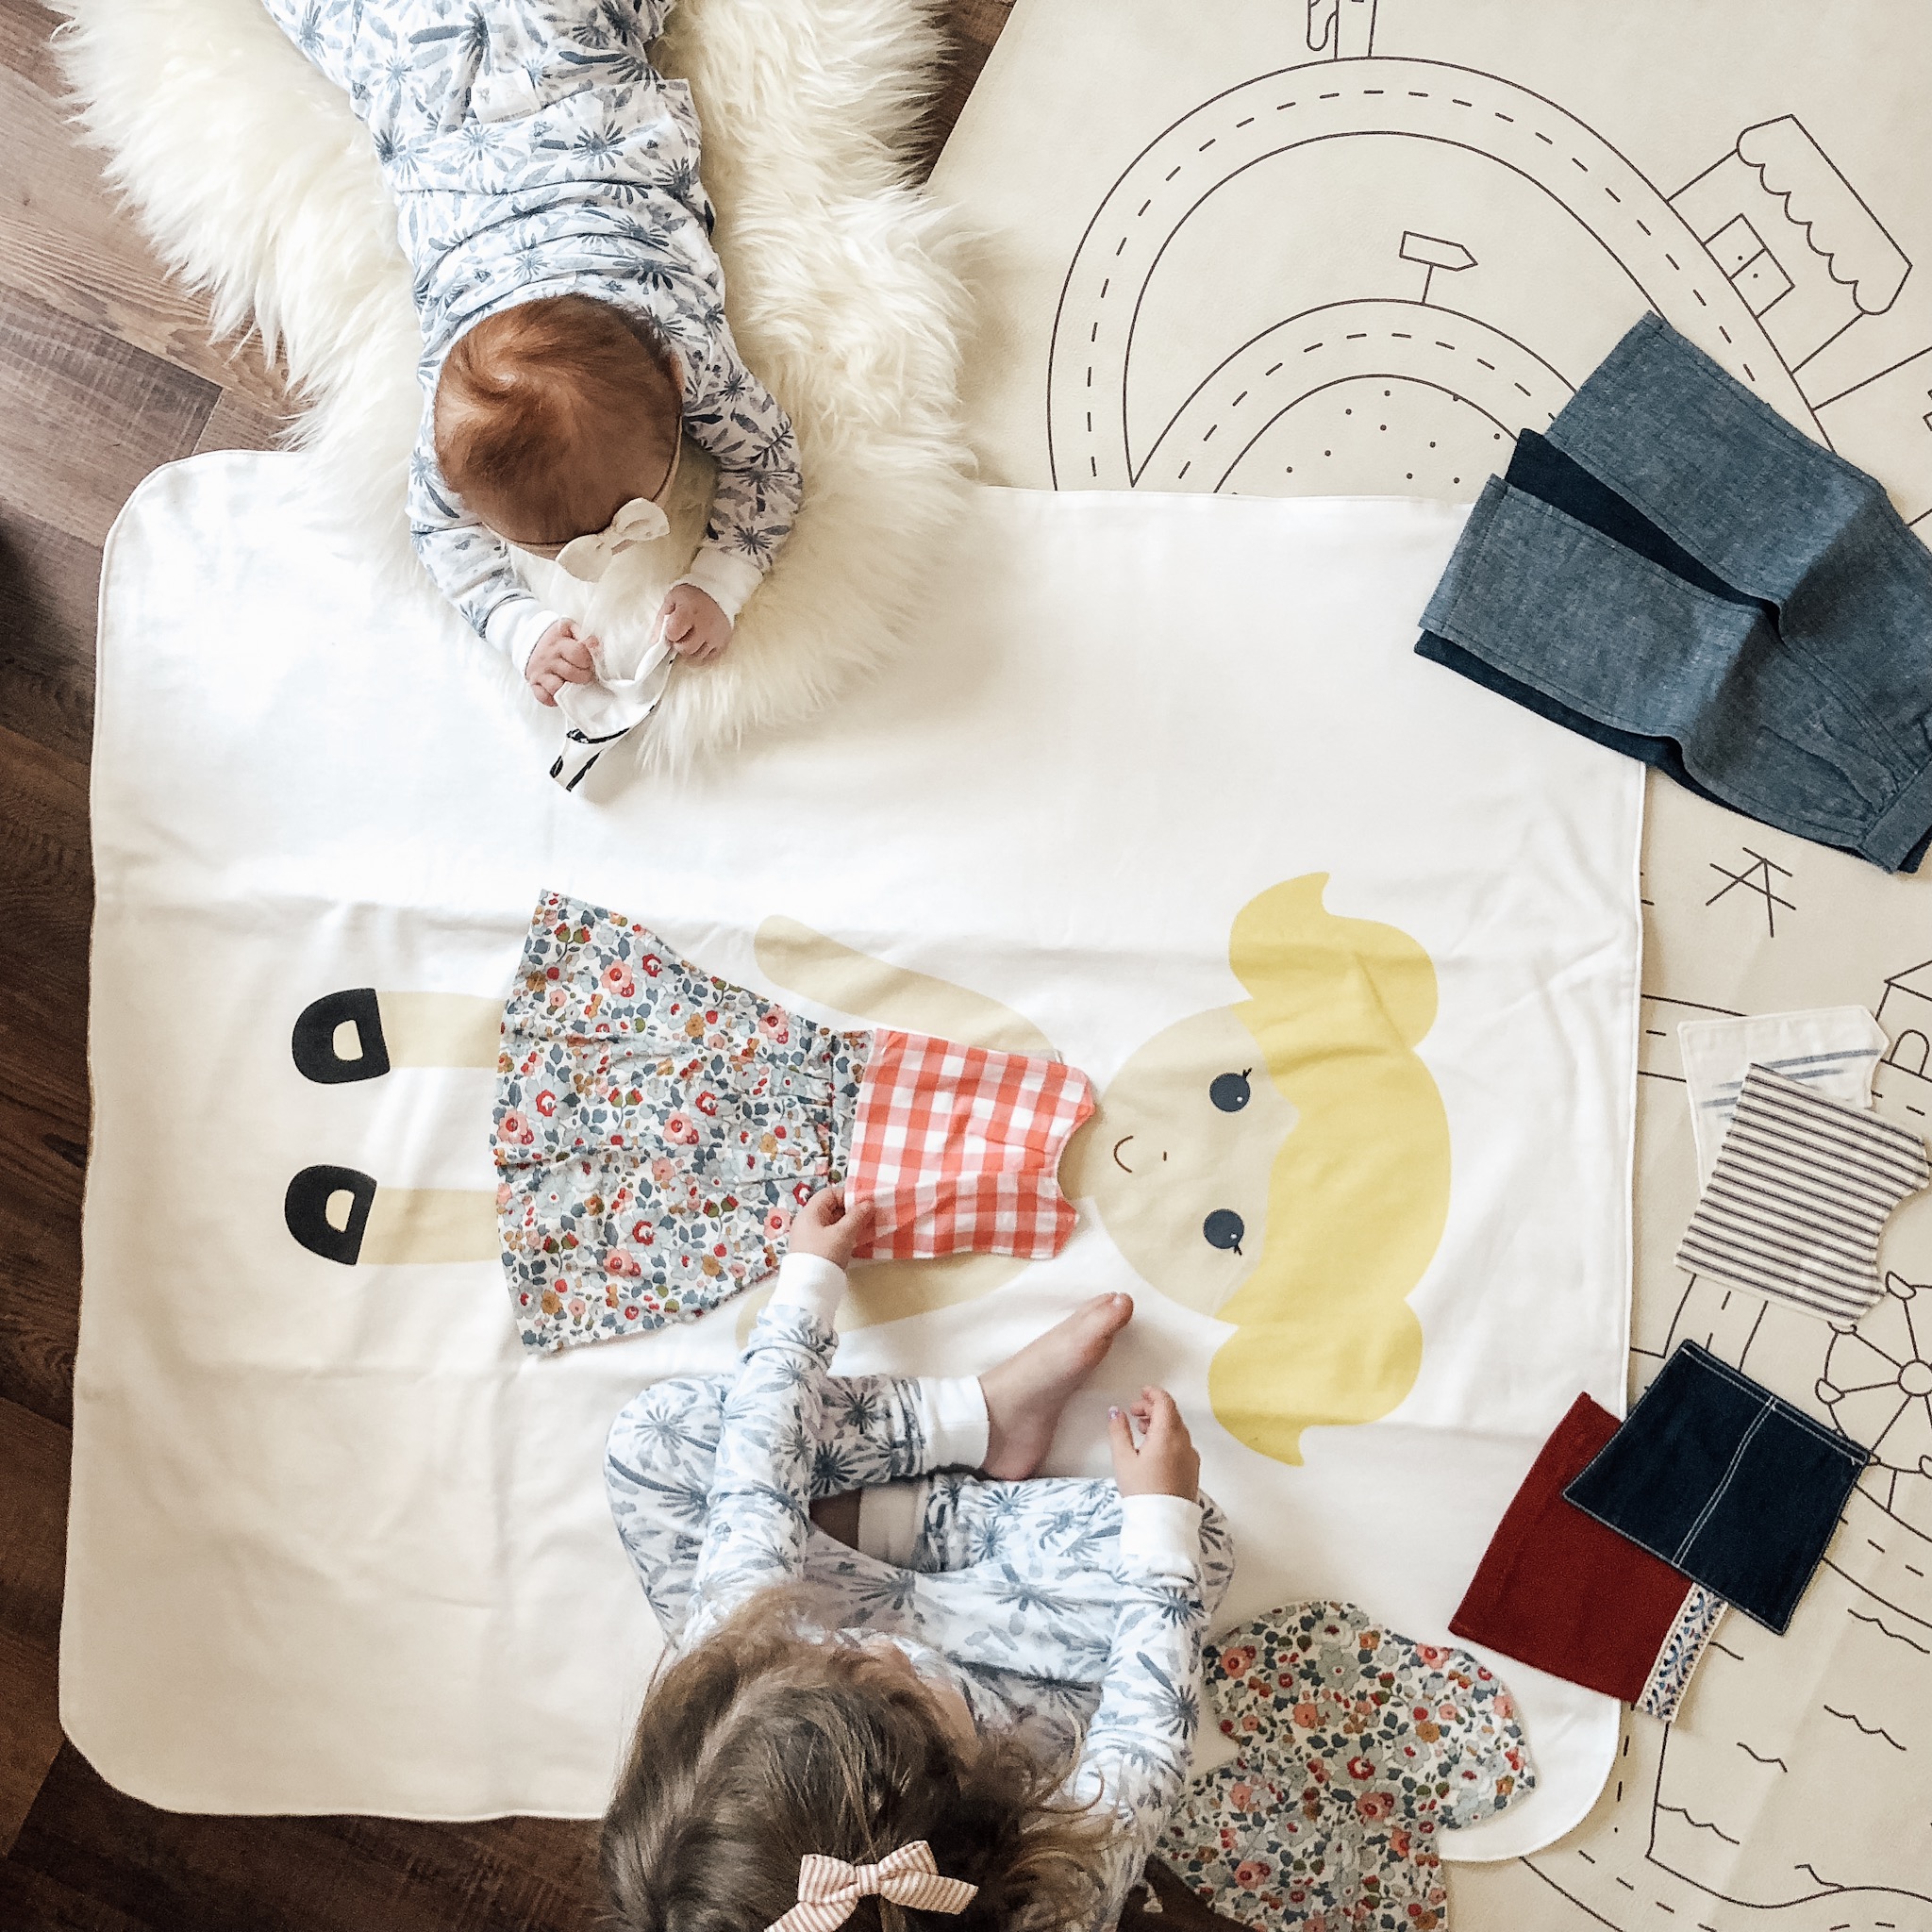 Paper Doll Blanket: A blanket, a toy, and a cherished keepsake all